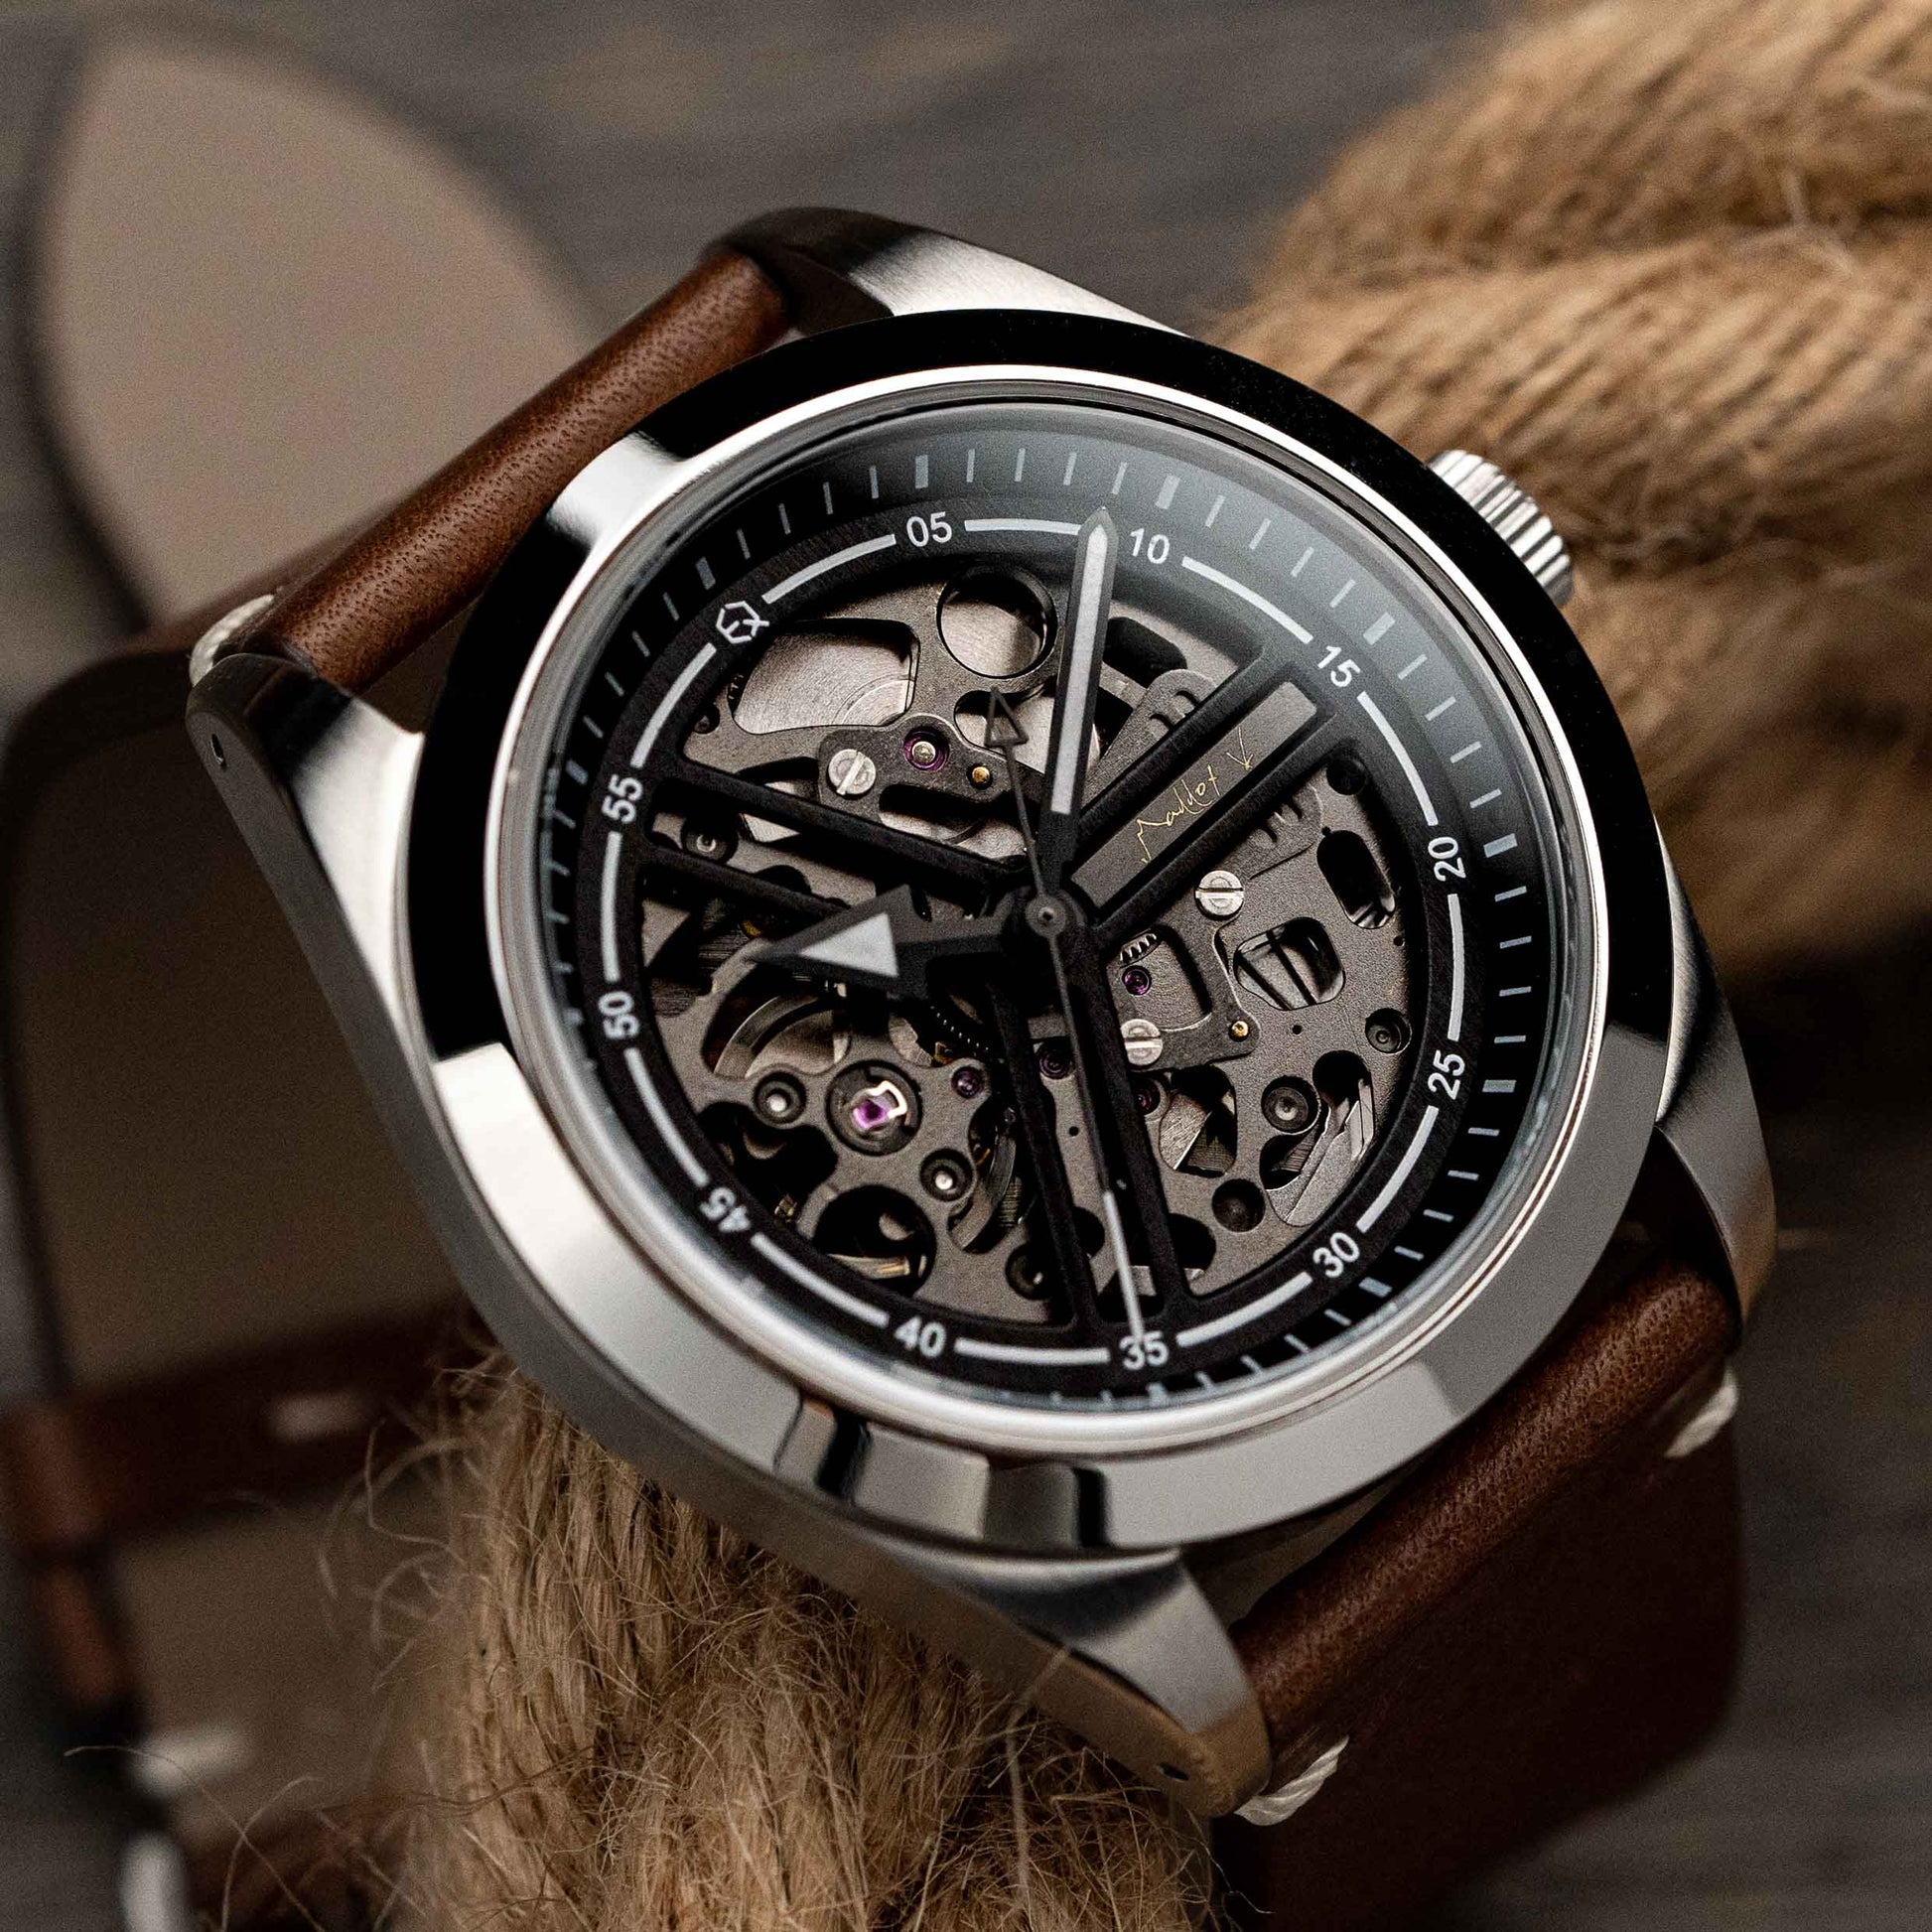 EONIQ expedition watch - custom watch with seiko movement and free name engraving